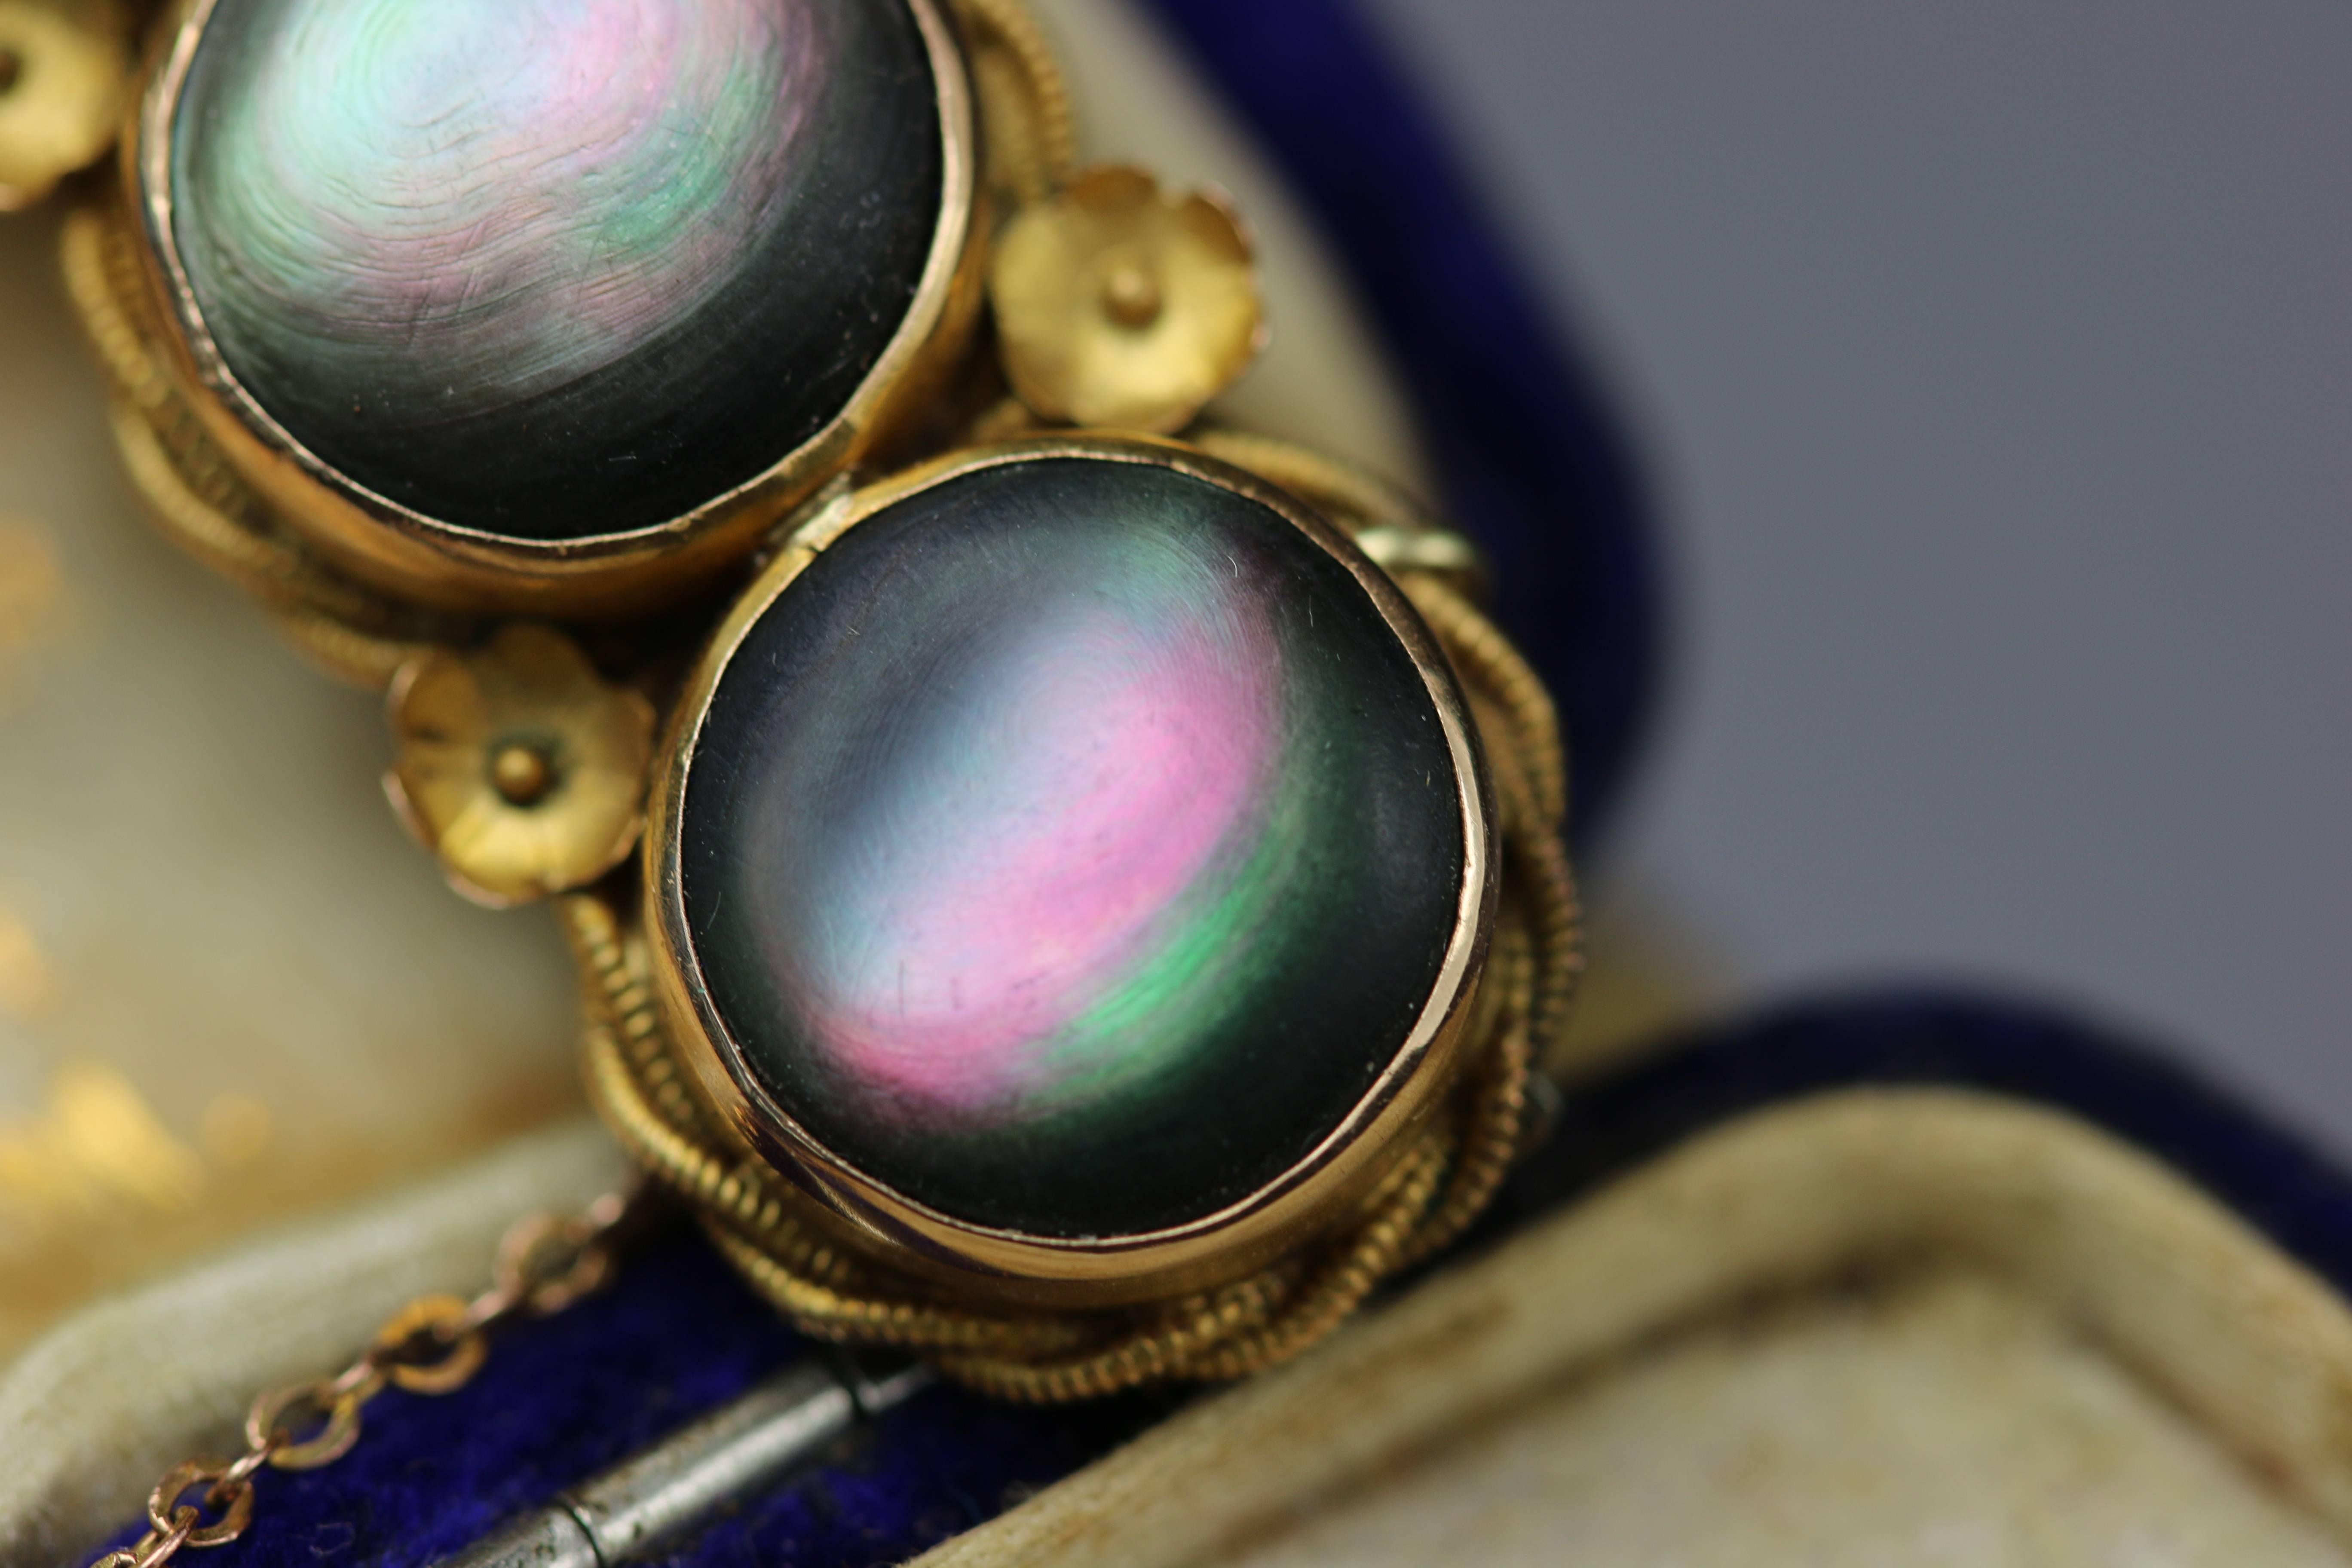 This is a wonderful example of Victorian jewellery. The main focus of the piece is the set of three mother of pearl discs. These have a beautiful dark body giving the perfect background to the colourful iridescence. The way the opalescent colours